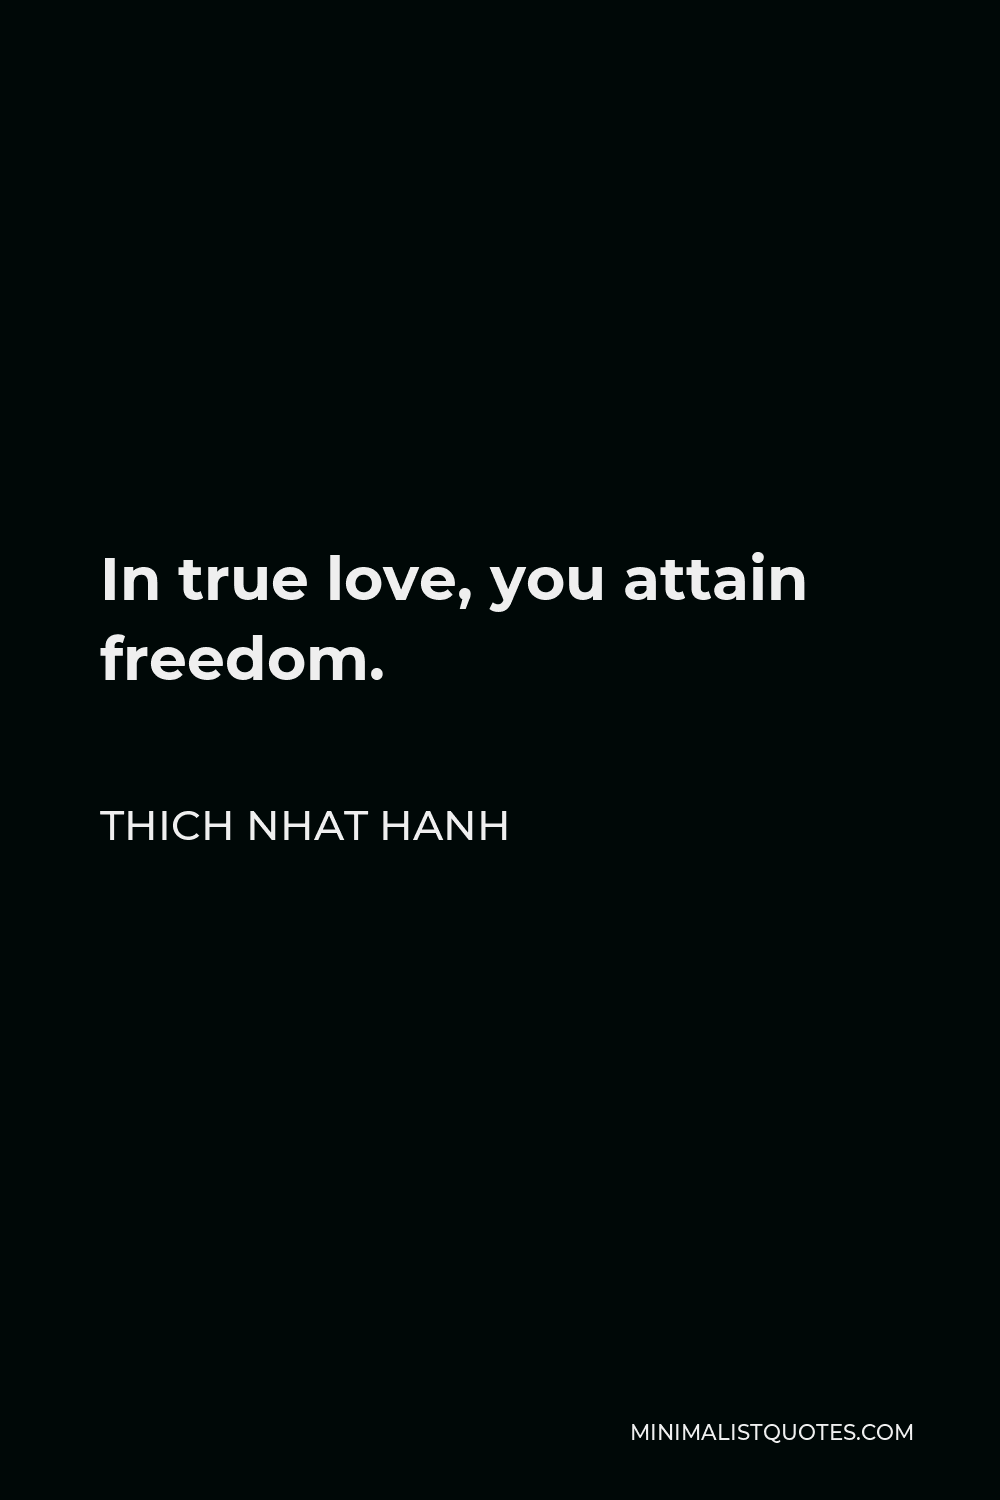 Thich Nhat Hanh Quote: In true love, you attain freedom.